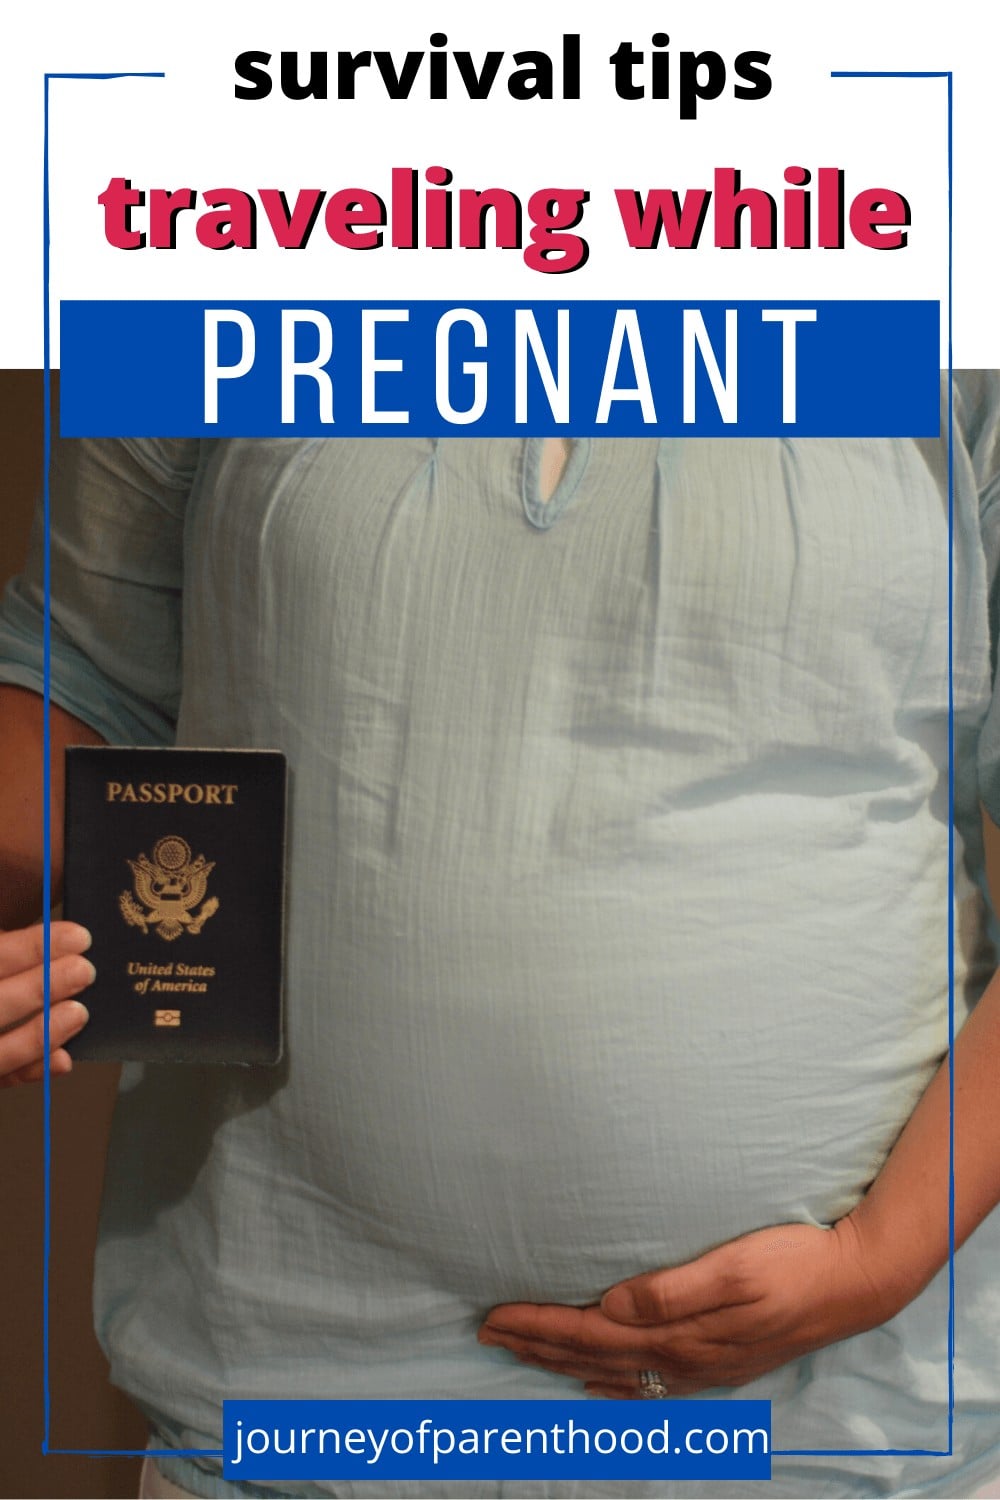 can you travel far while pregnant